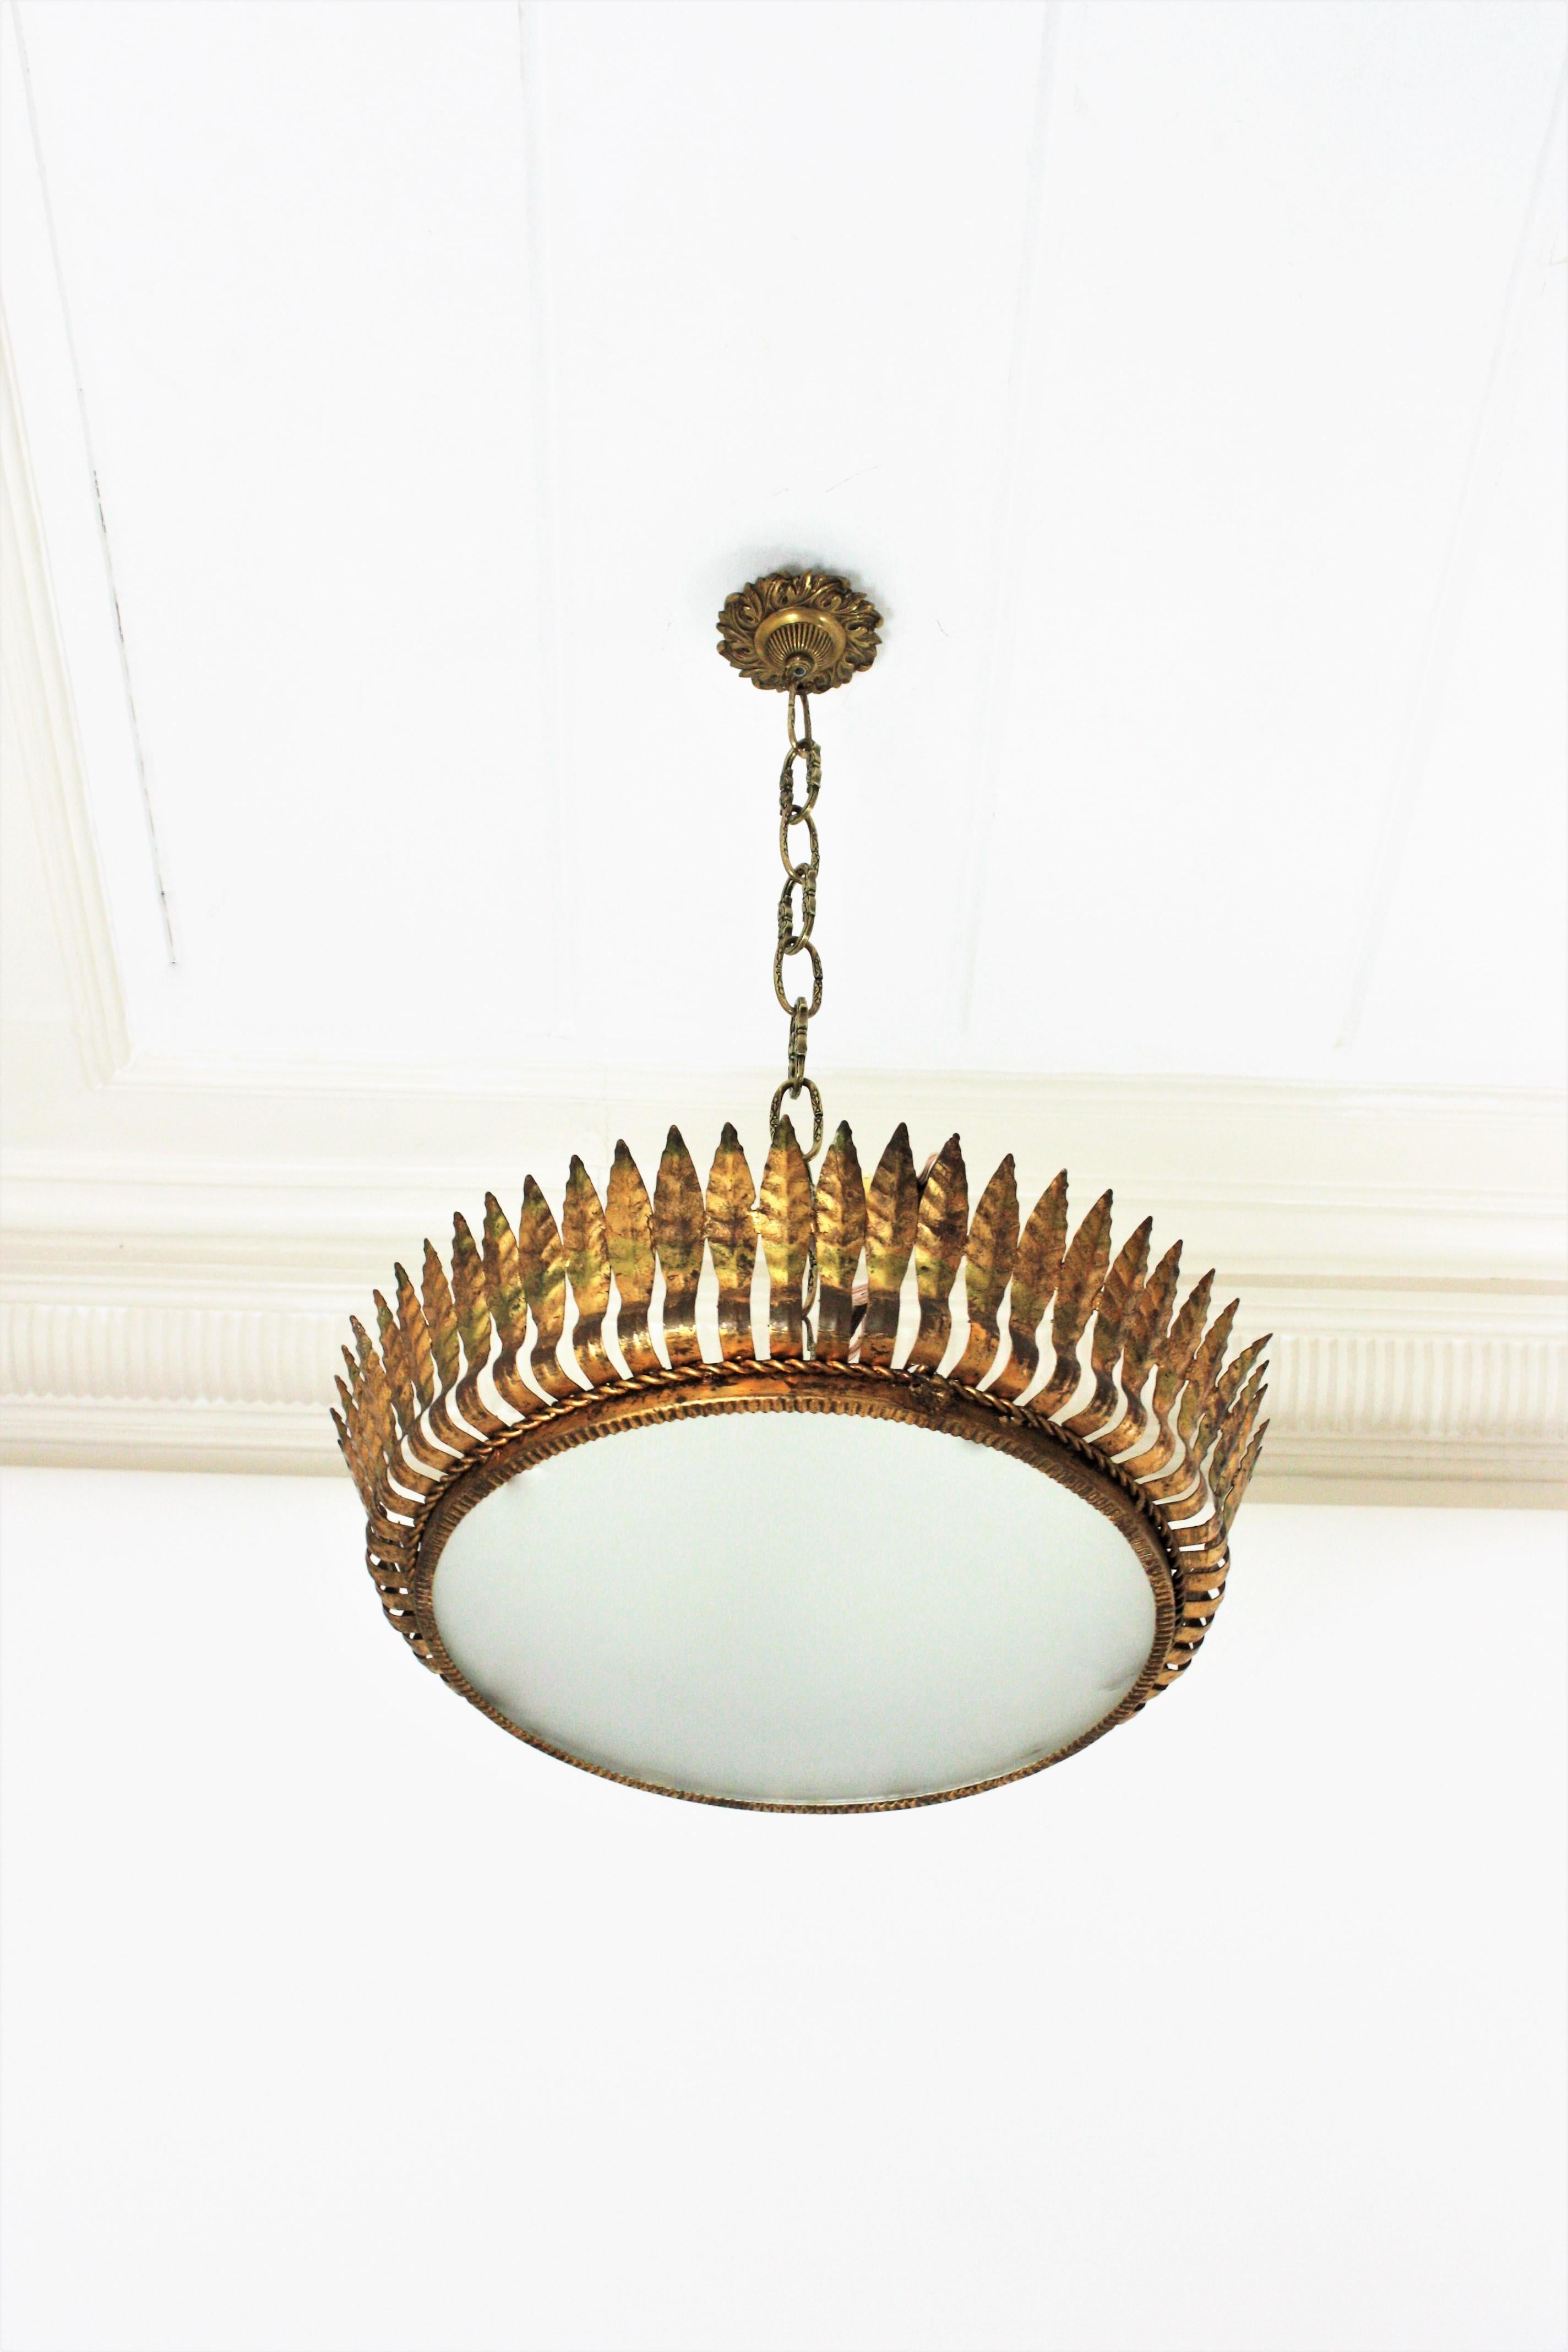 Midcentury Crown Sunburst Large Flush Mount (20 in ), Gilt Iron. Spain, 1950s.
This sunburst flushmount or pendant has leaf motifs surrounding a central frosted glass diffuser and a twisted iron rope surrounding the glass.
Handcrafted in hammered